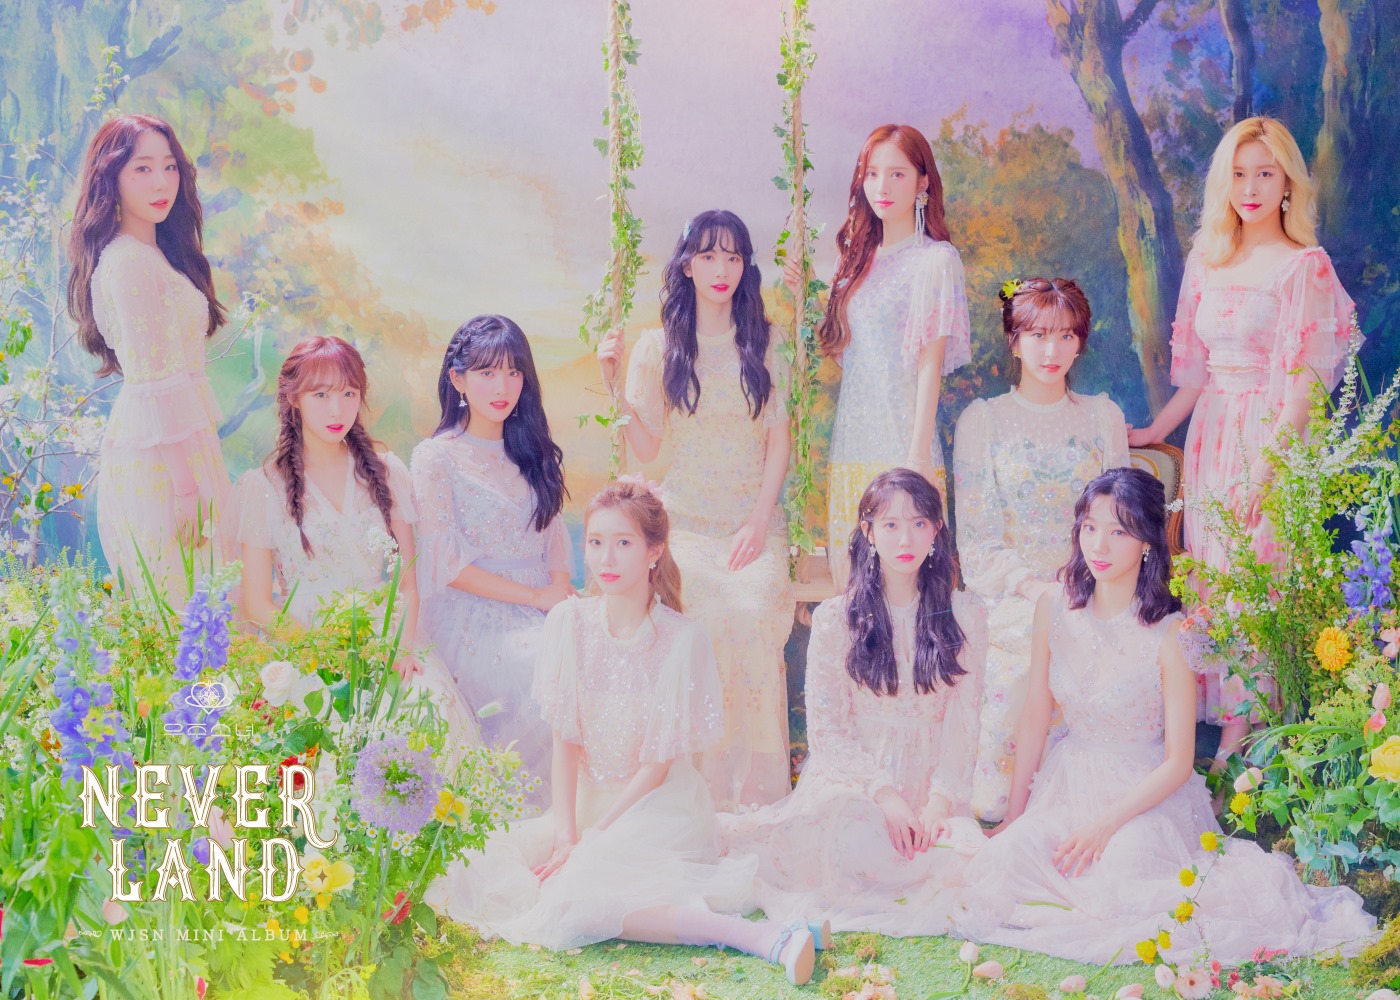 WATCH: Cosmic Girls Look Dreamy In The Concept Teaser For "Neverland"